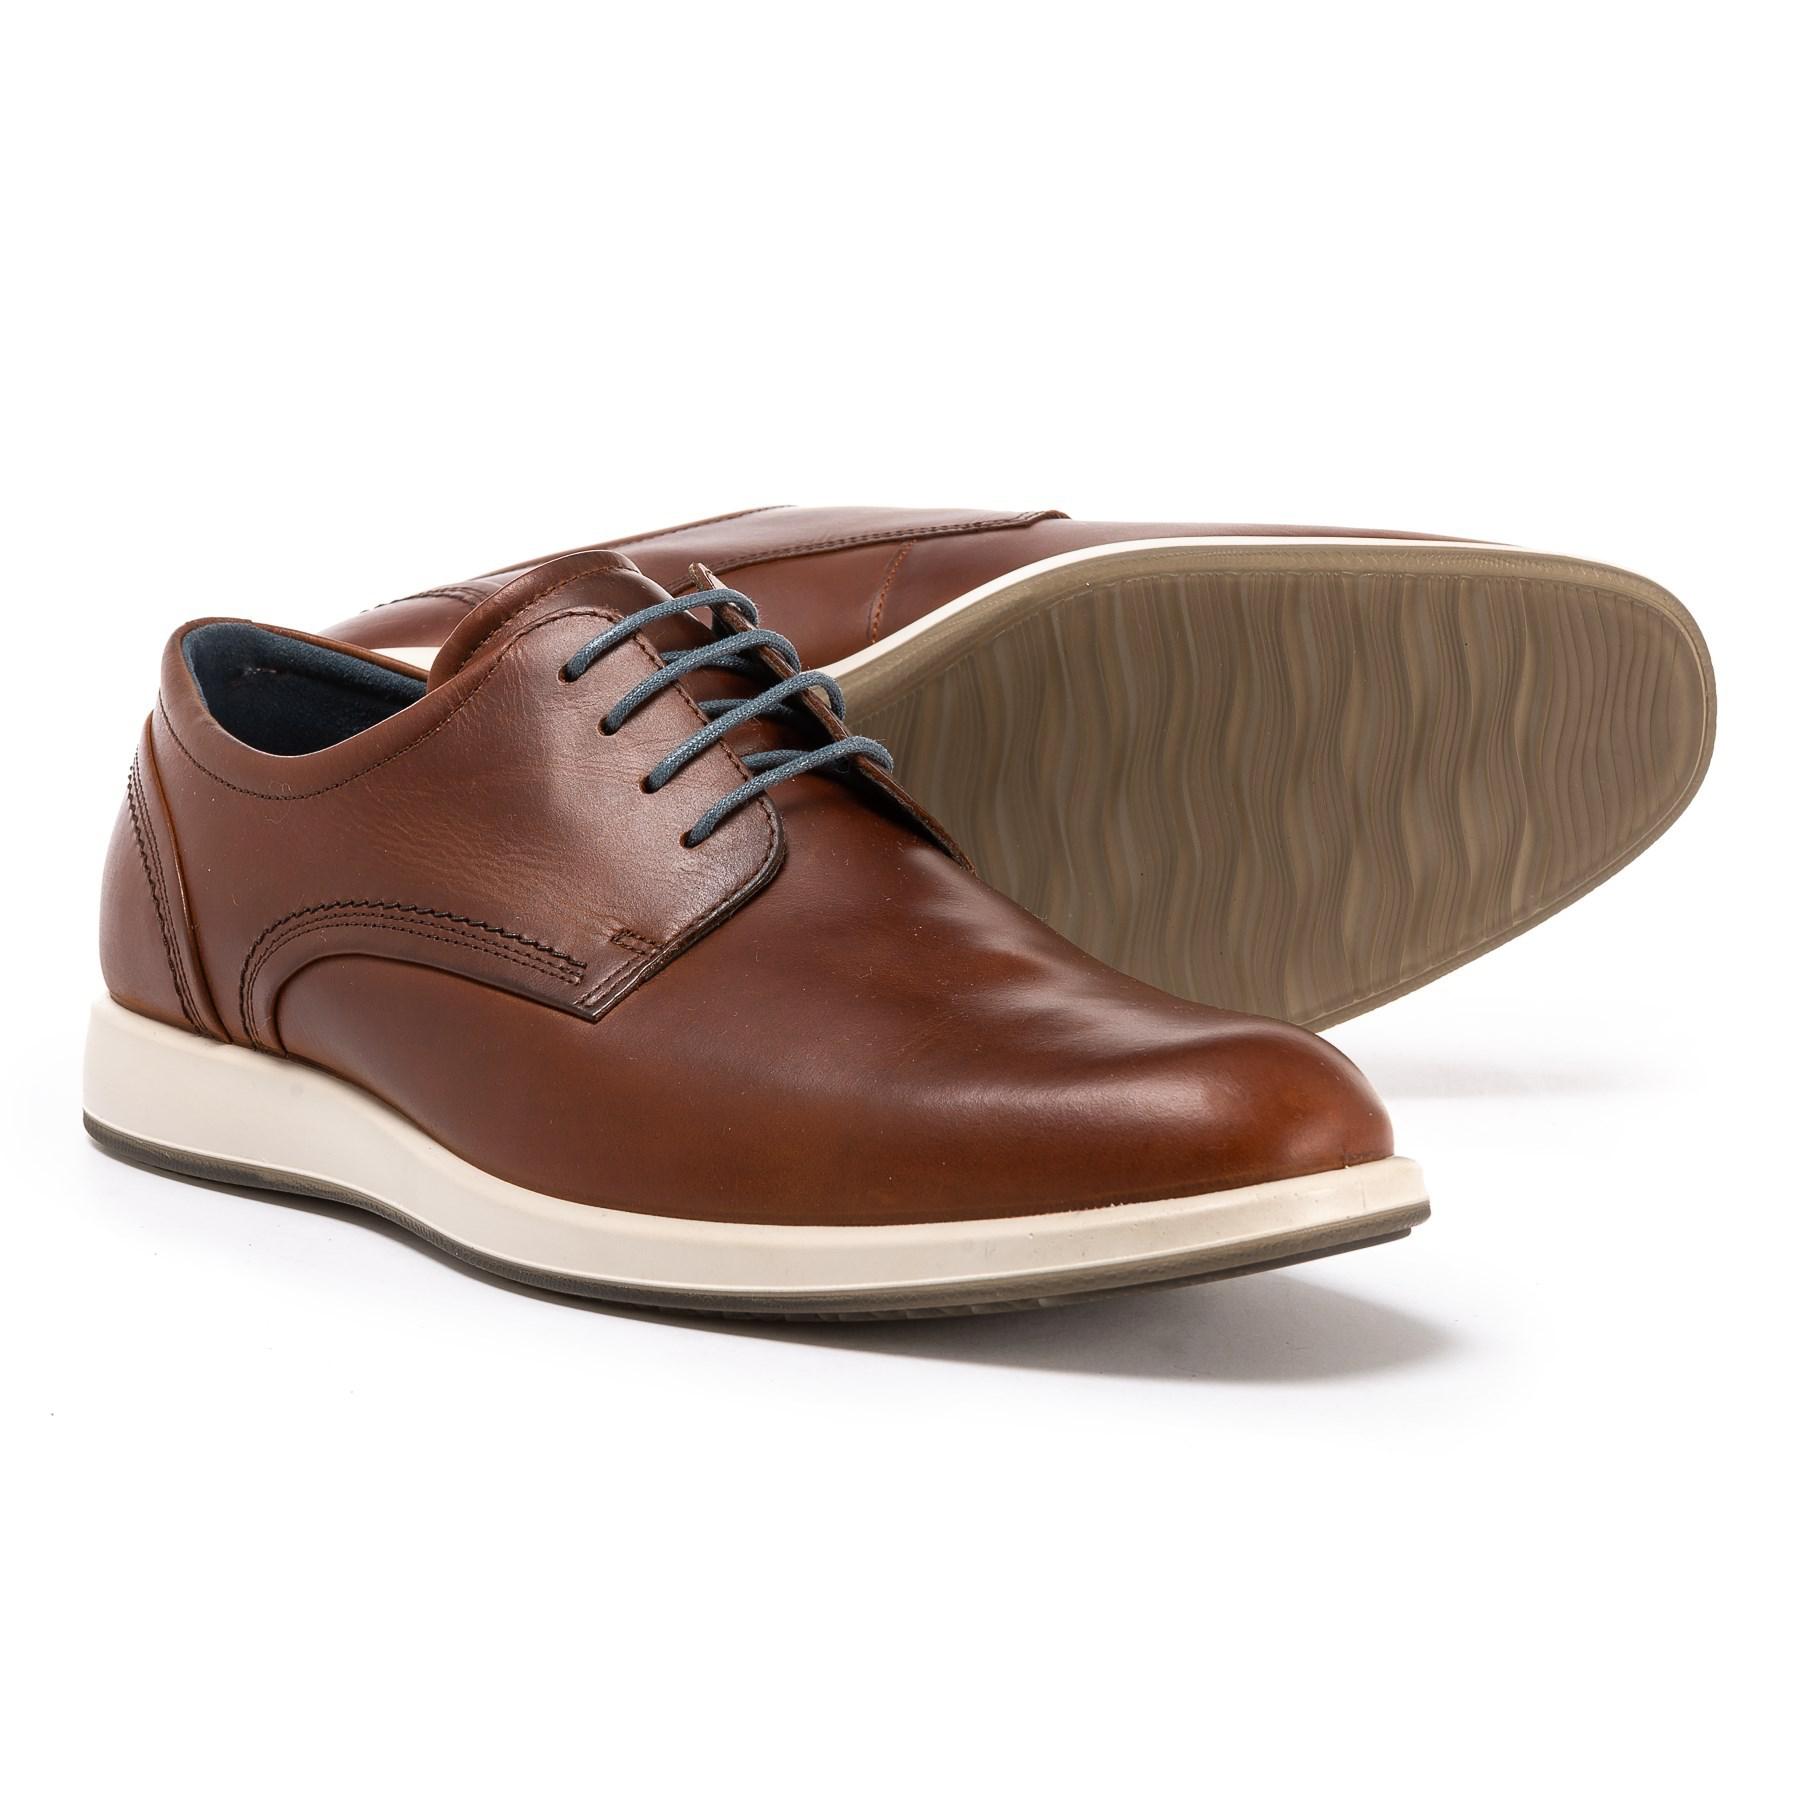 Ecco Leather Jared Tie Oxford Shoes in Cognac (Brown) for Men - Lyst